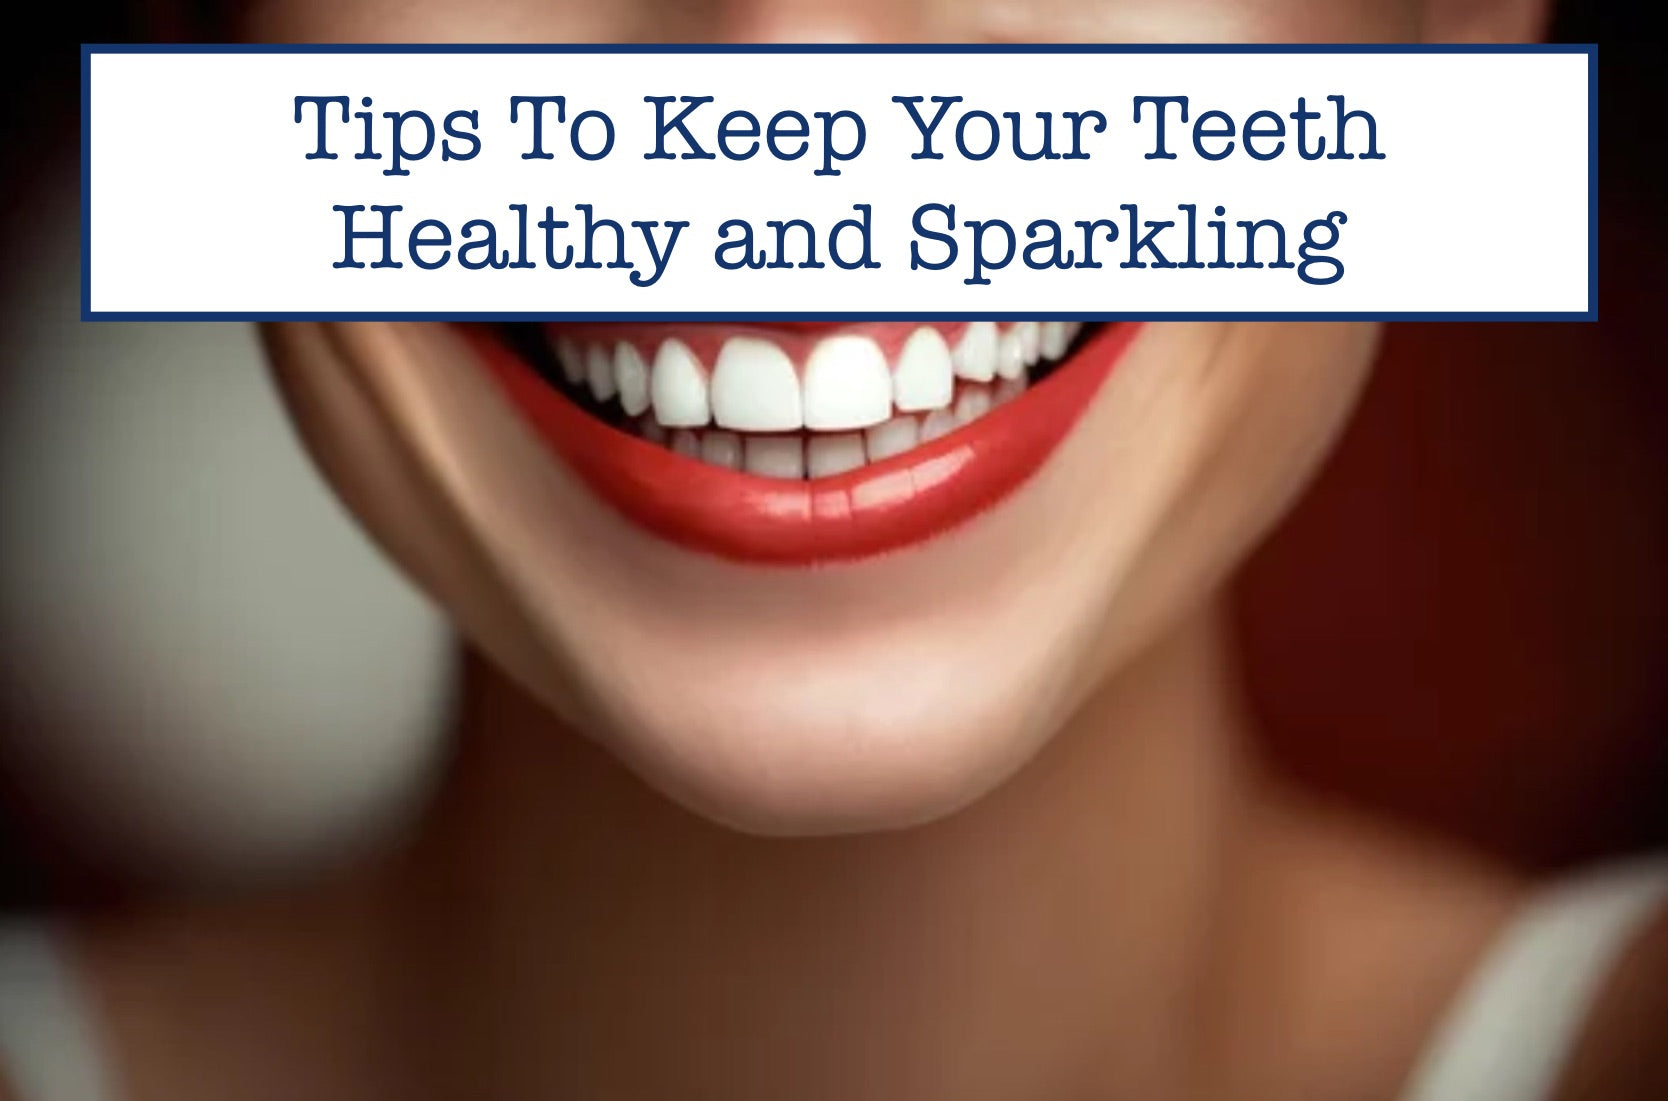 Tips To Keep Your Teeth Healthy and Sparkling